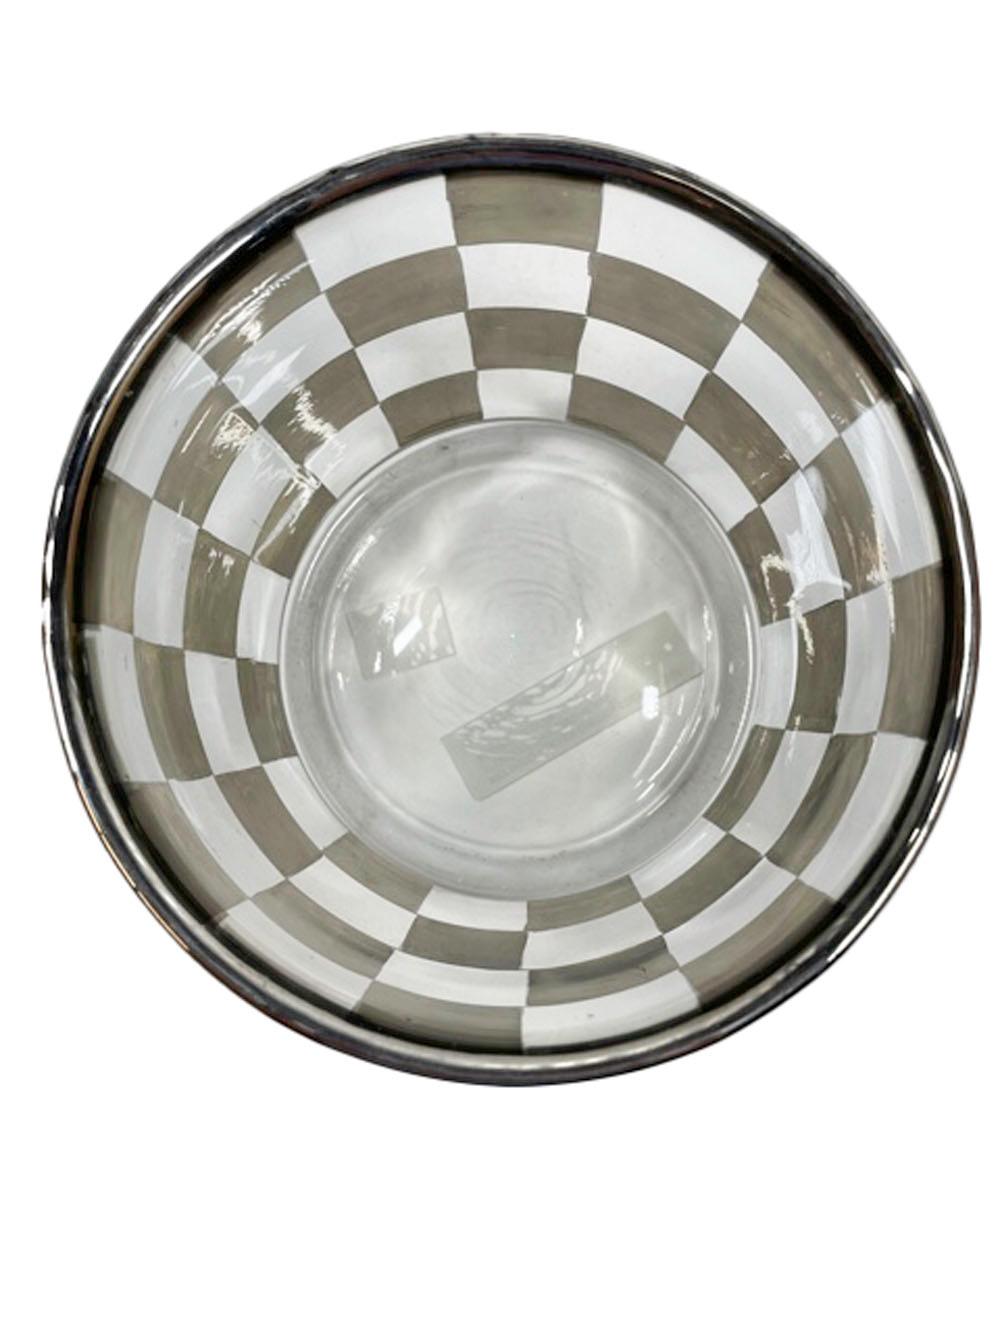 Art Deco Cocktail Set with Silver Check Pattern on Ribbed Optical Glass 2